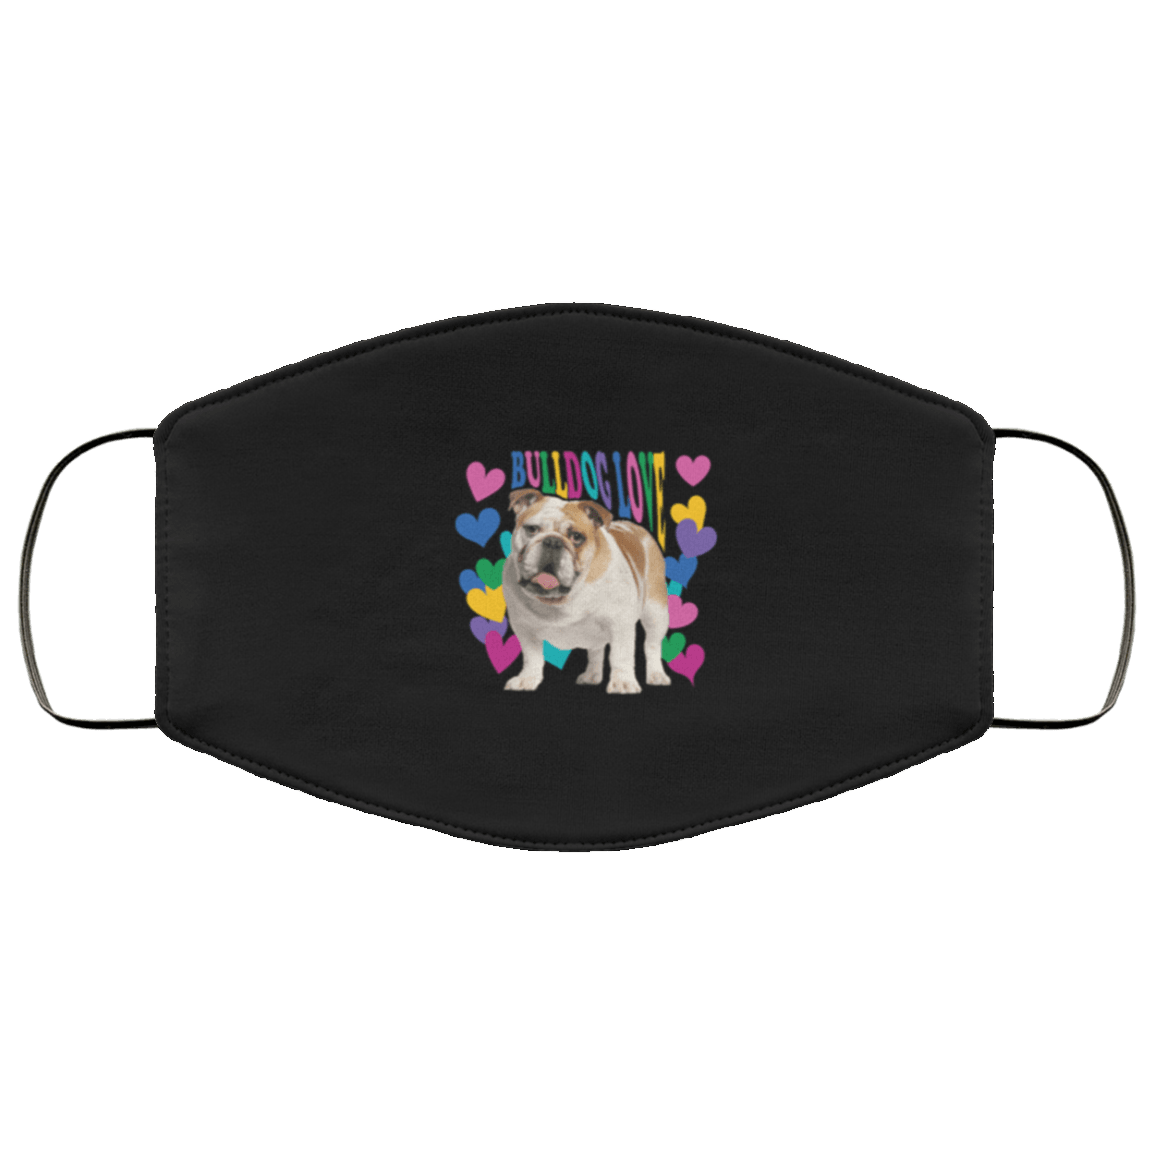 Designs by MyUtopia Shout Out:Bulldog Love Adult Fabric Face Mask with Elastic Ear Loops,3 Layer Fabric Face Mask / Black / Adult,Fabric Face Mask